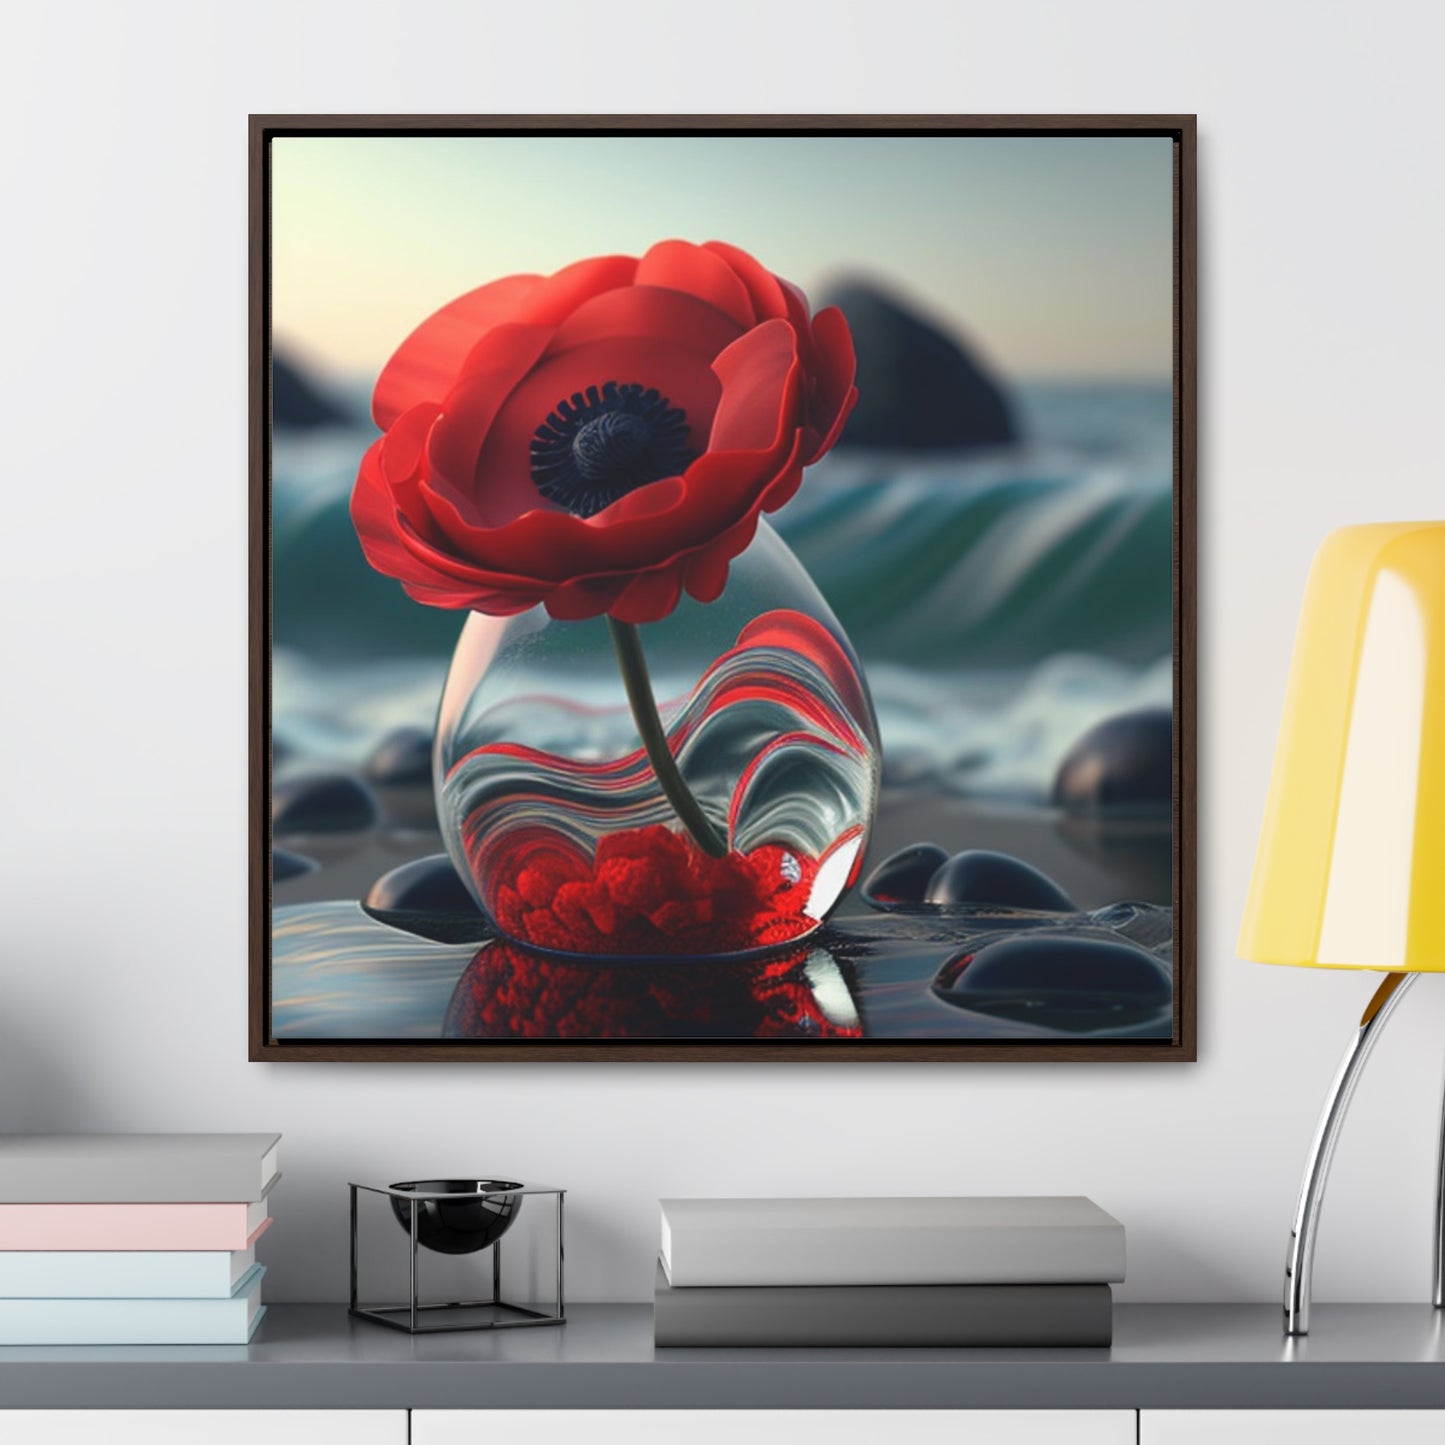 Gallery Canvas Wraps, Square Frame Red Anemone in a Vase 1